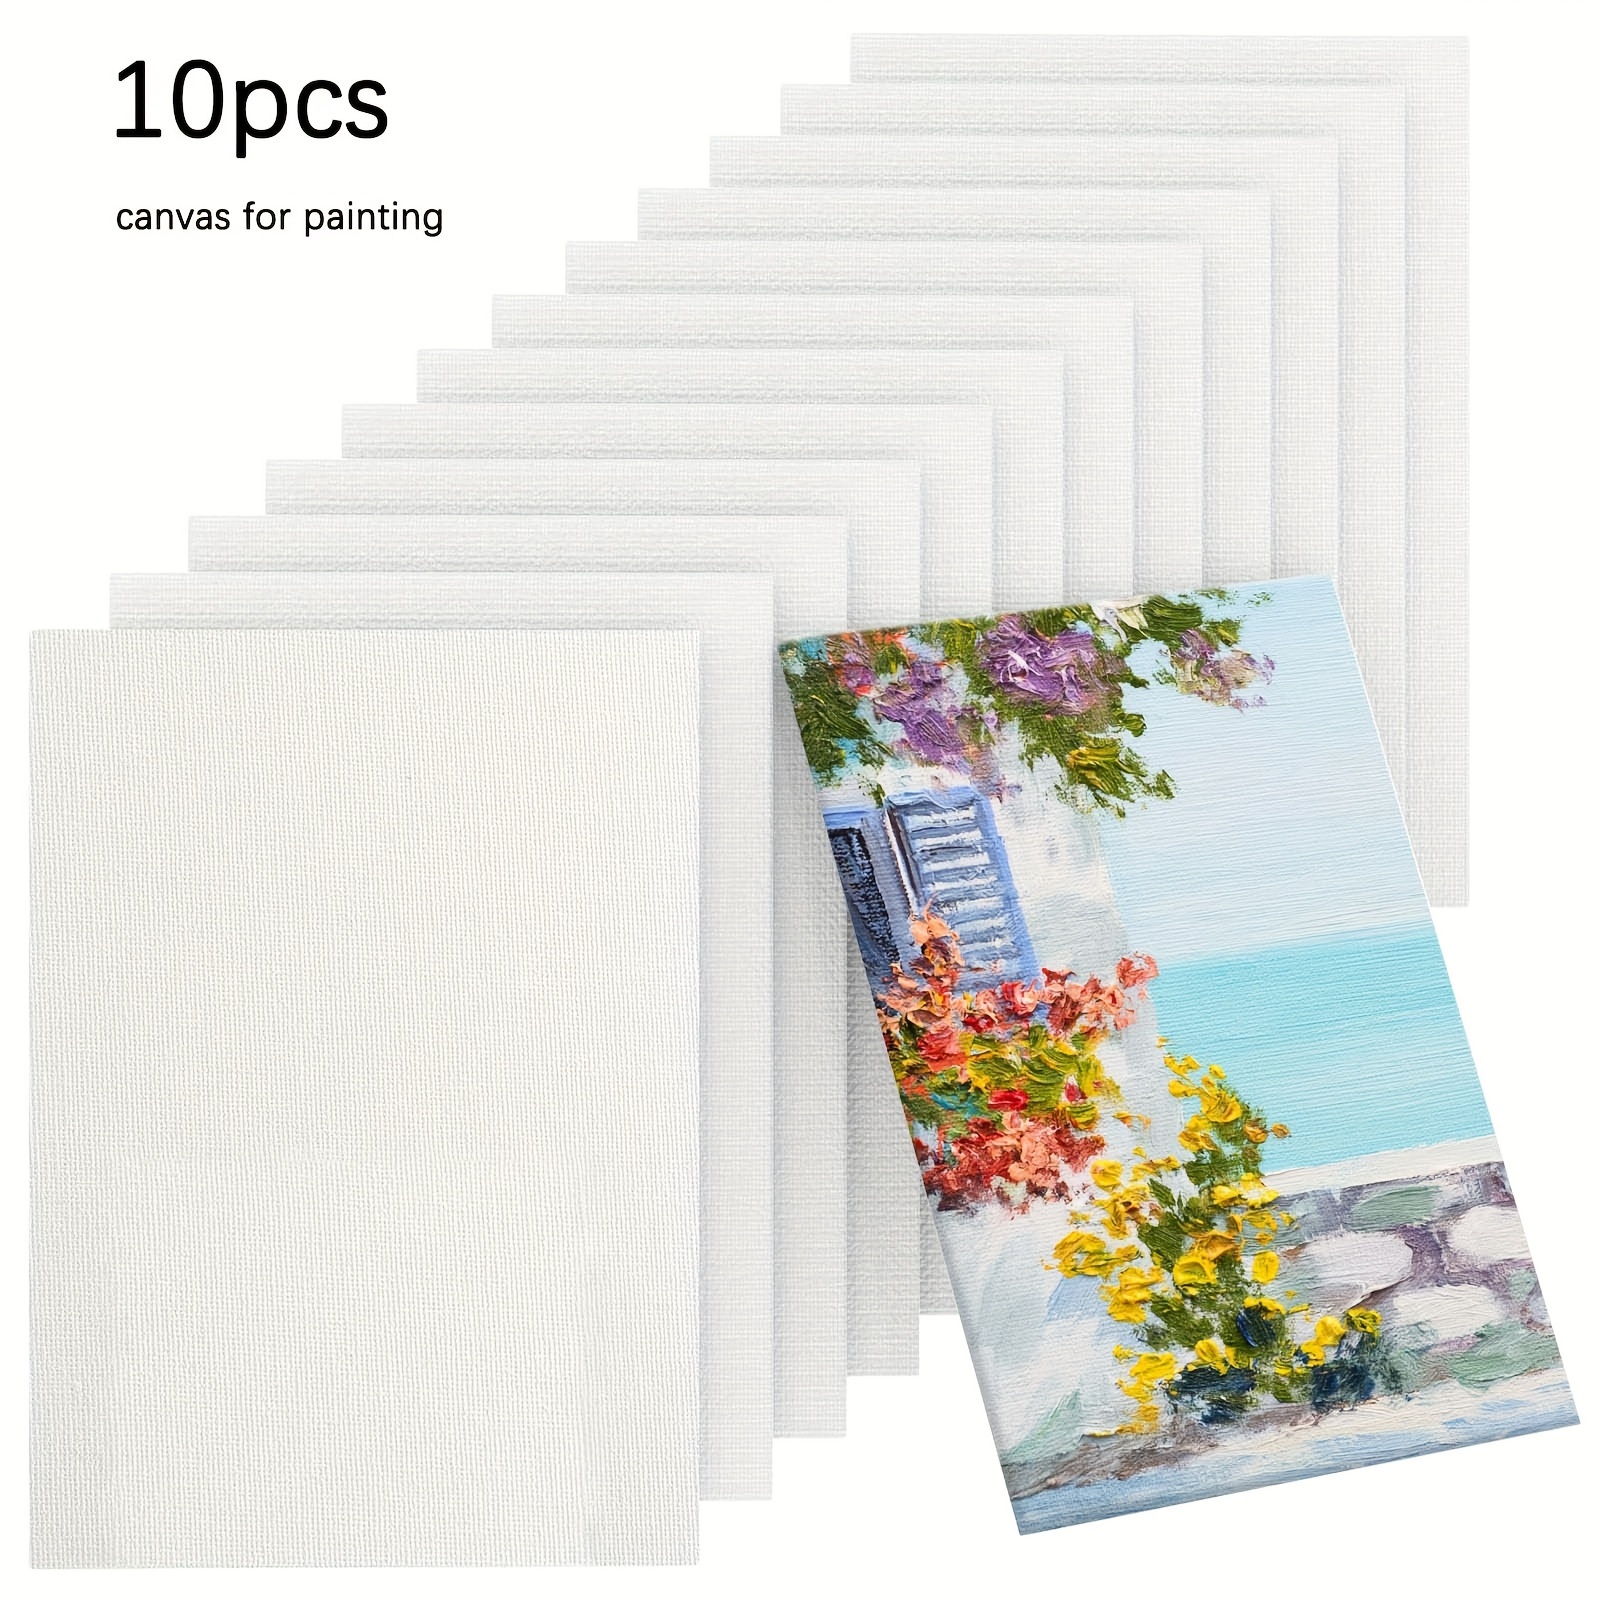 

Painting Canvas 5 "x7", Set Of 10 Canvas Panels, 100% Cotton Blank Flat Art Canvas, Used For Acrylic Oil Painting, Watercolor, Egg Color Painting, Pigment Painting